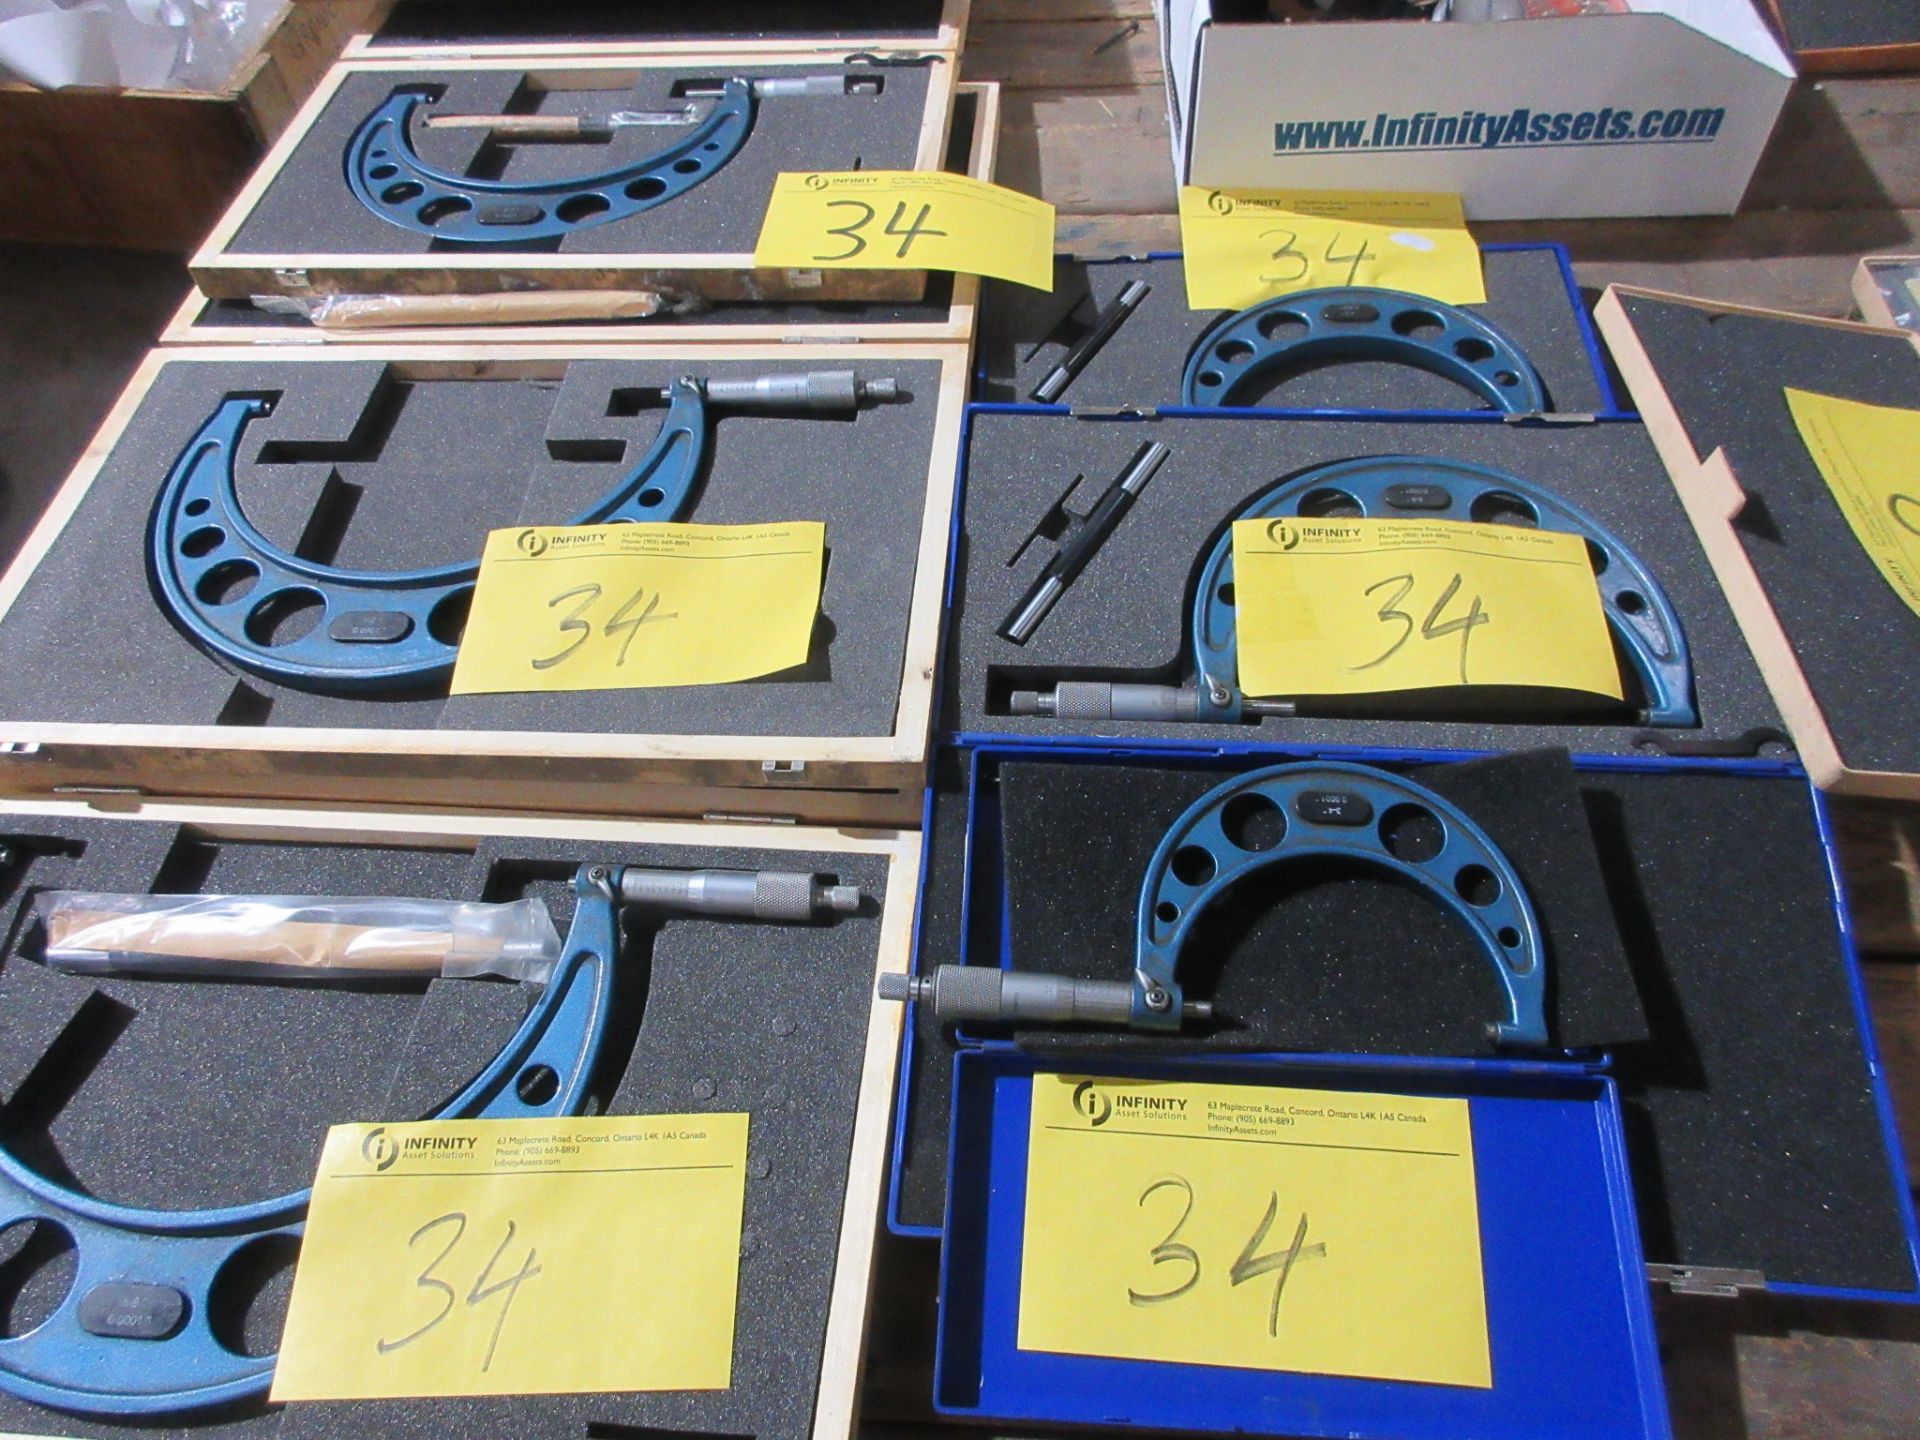 LOT OF (7) FOWLER MICROMETERS IN CASES (9-10", 8-9", 7-8", 6-7", 5-6", 4-5", 3-4") - Image 4 of 4